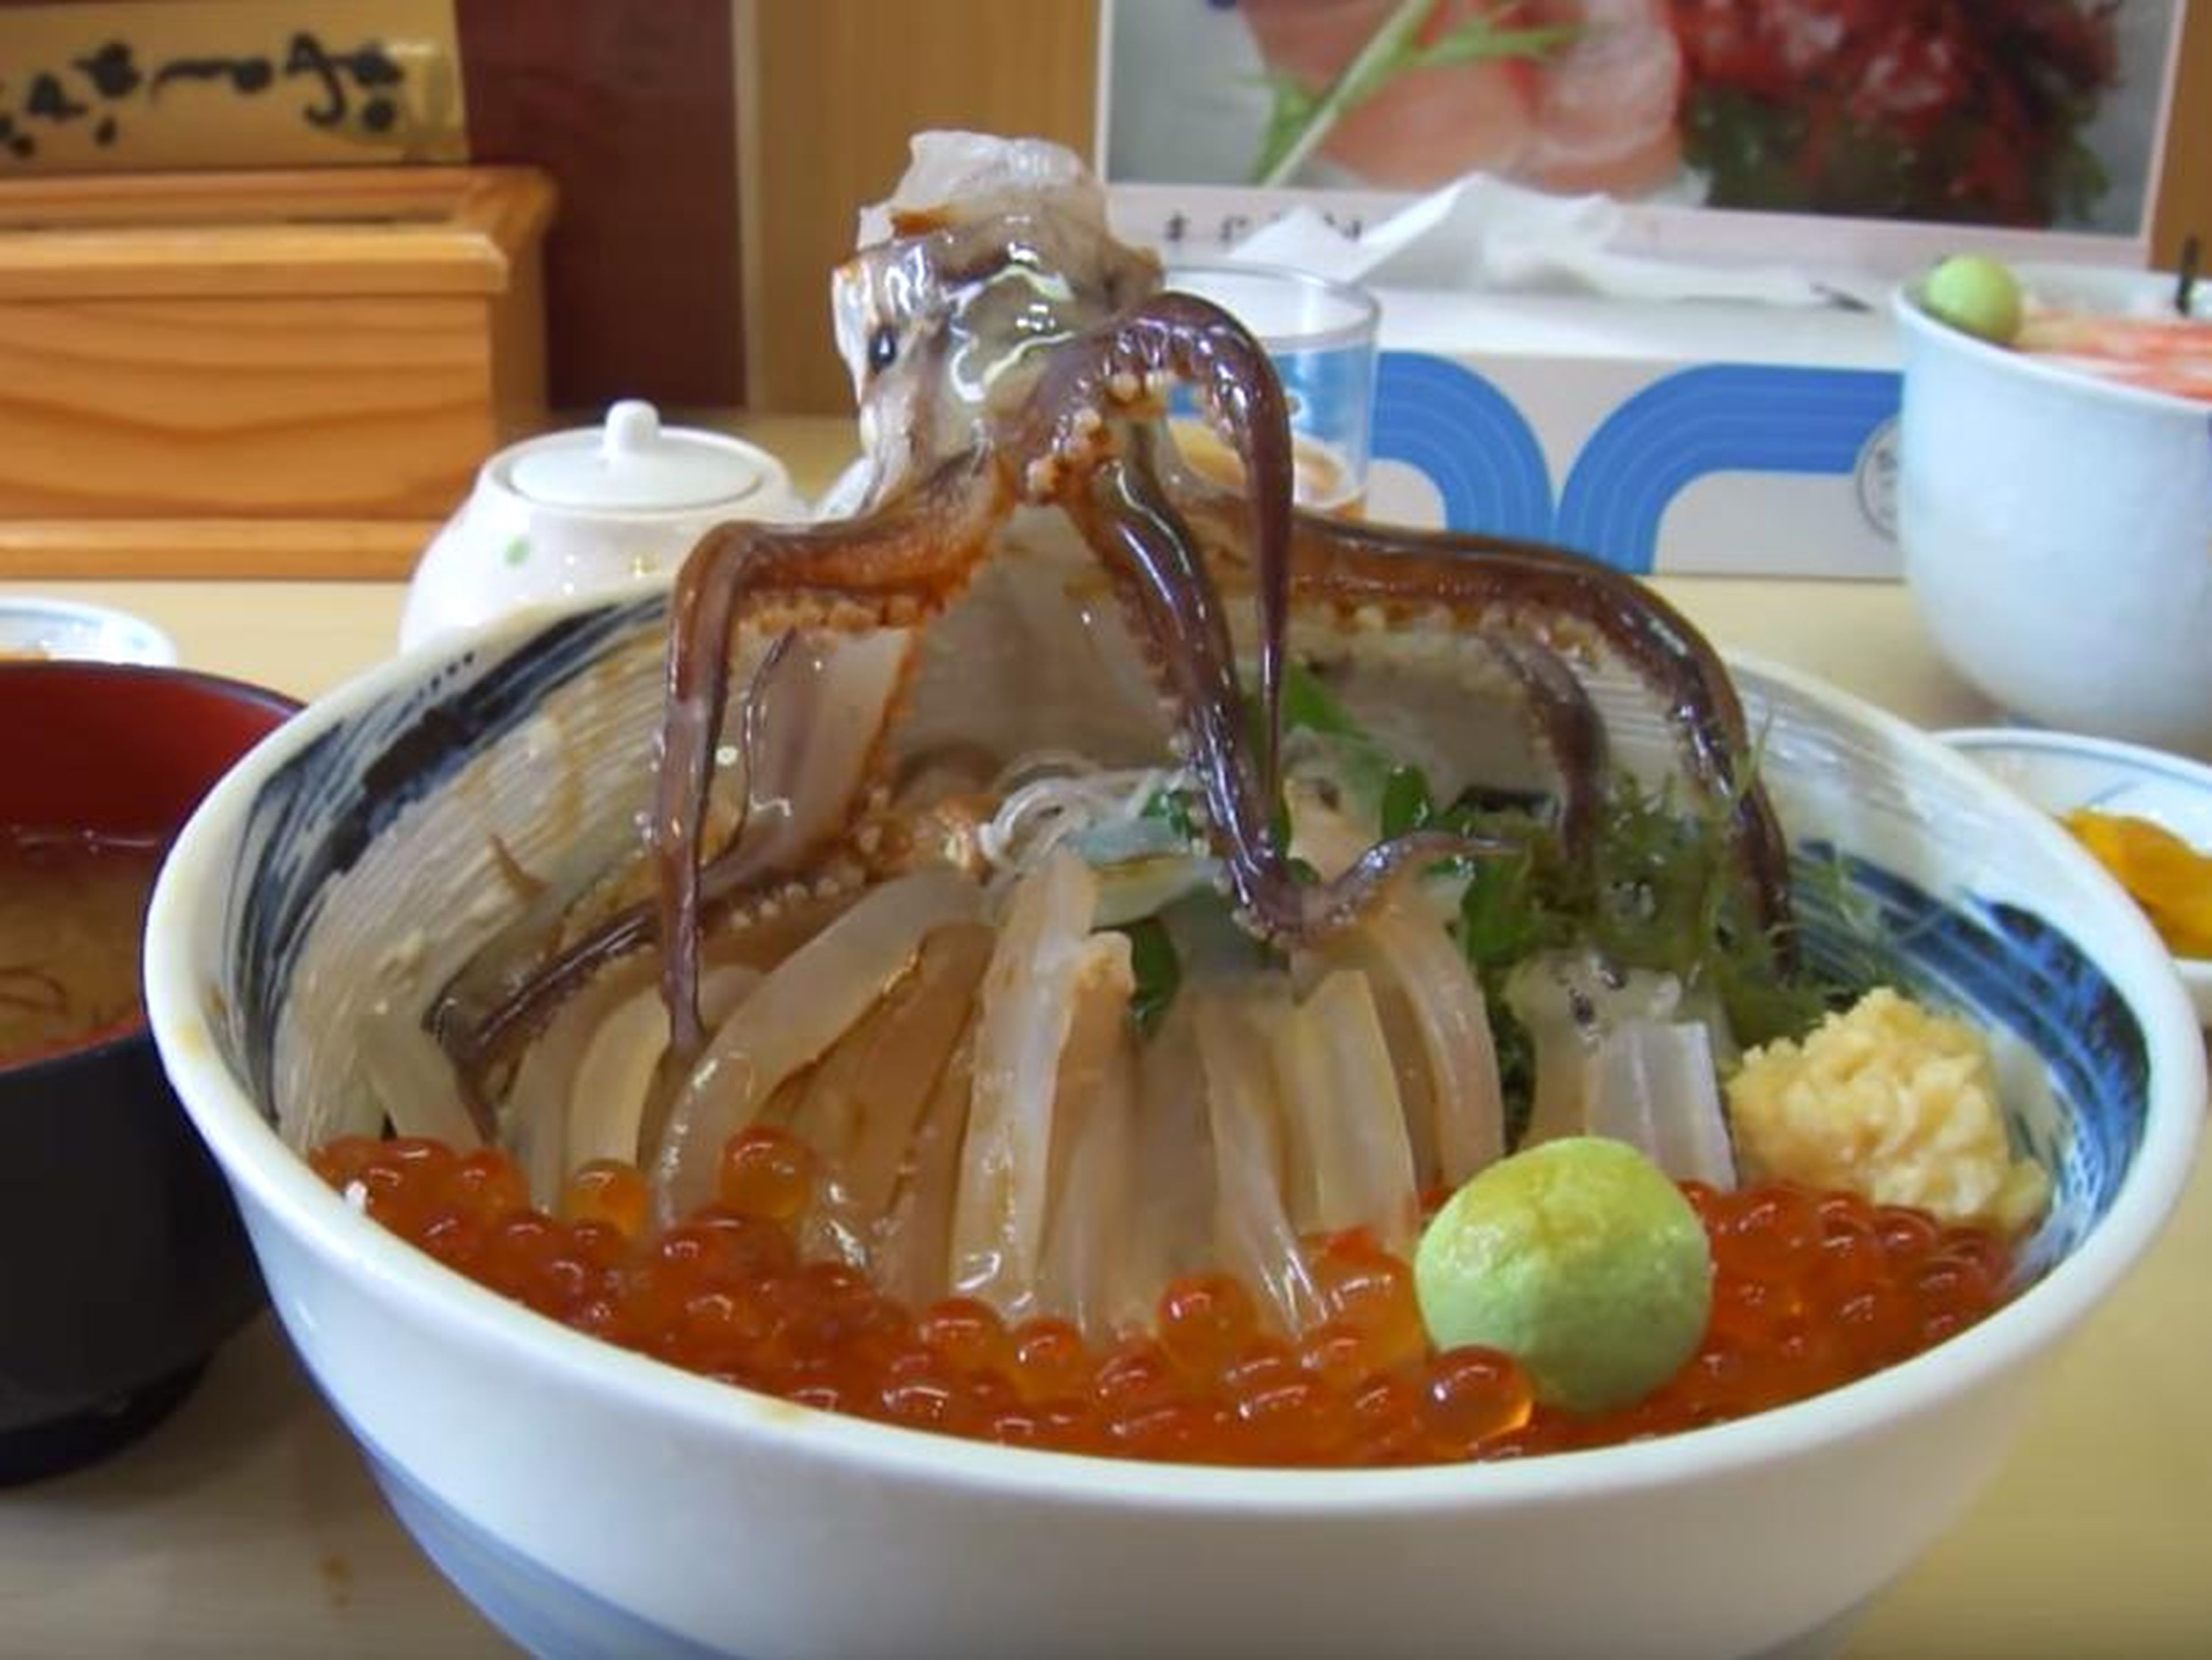 If you can make it through the snow and into a restaurant, you may be able to try an internet-famous dish featuring a dancing cuttlefish. Yes, it flails it's tentacles all over the dish just as you're ready to eat it!